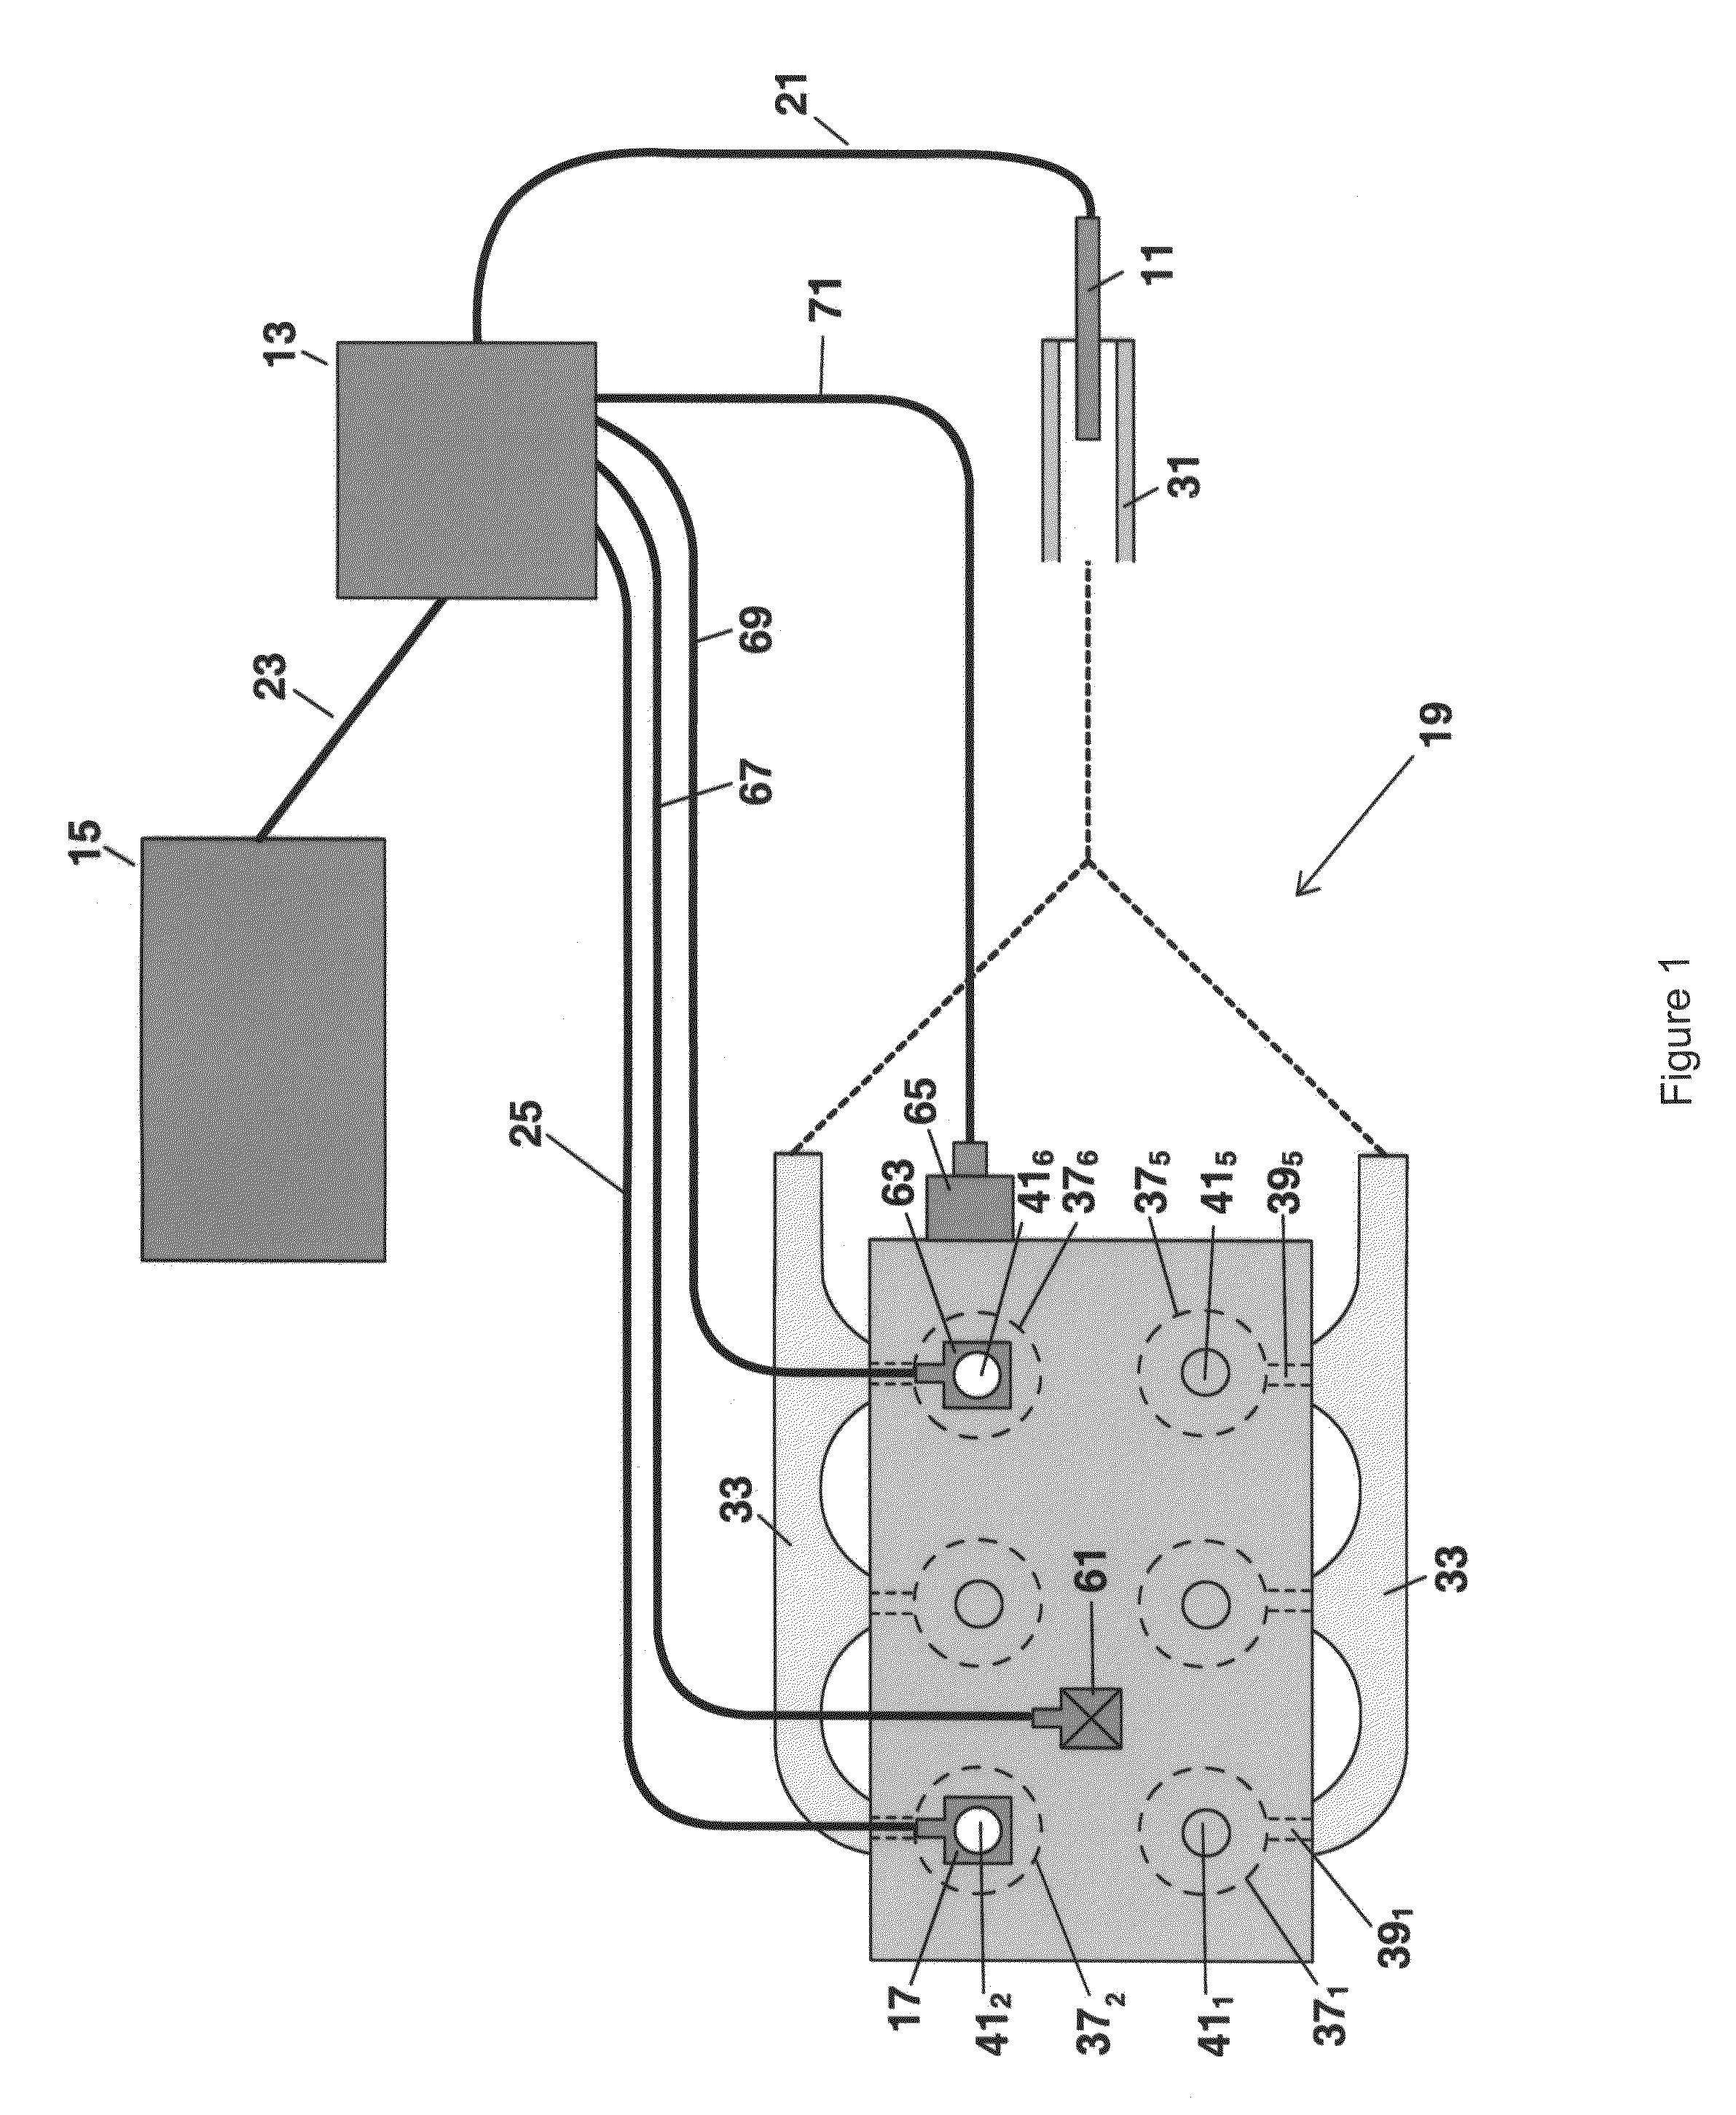 Method and apparatus for detecting misfires and idenfifying causes